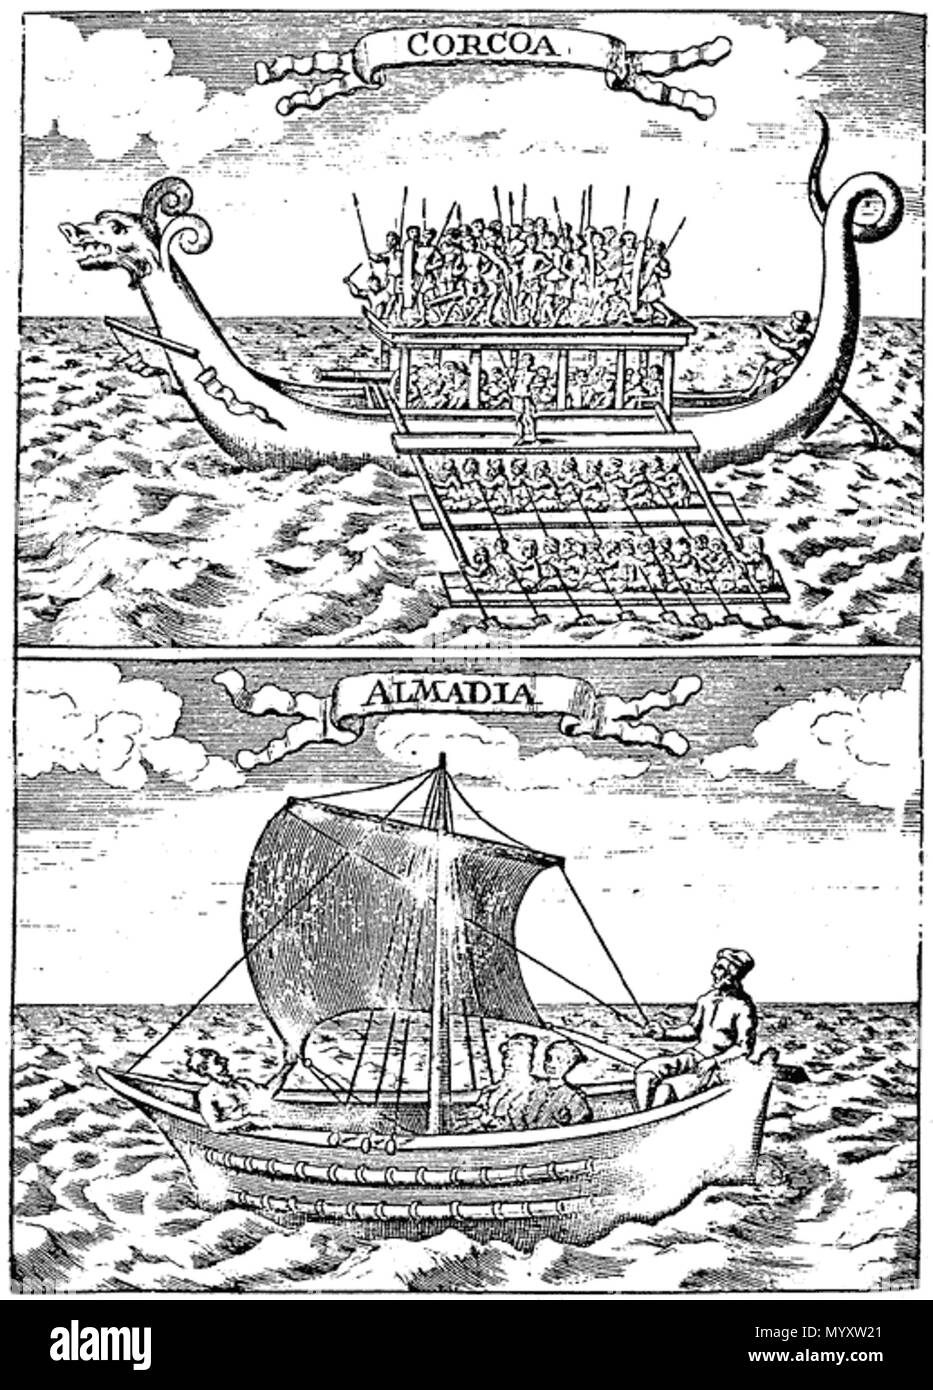 . English: Engraving of a 'Corcoa' (Karakoa) and an Almadia (outrigger canoe) from The Discovery and Conquest of the Molucco and Philippine Islands (1711) by Bartolomé Leonardo de Argensola, translated into English by John Stevens 23 Corcoa and Almadia (Karakoa and outrigger canoes) Stock Photo